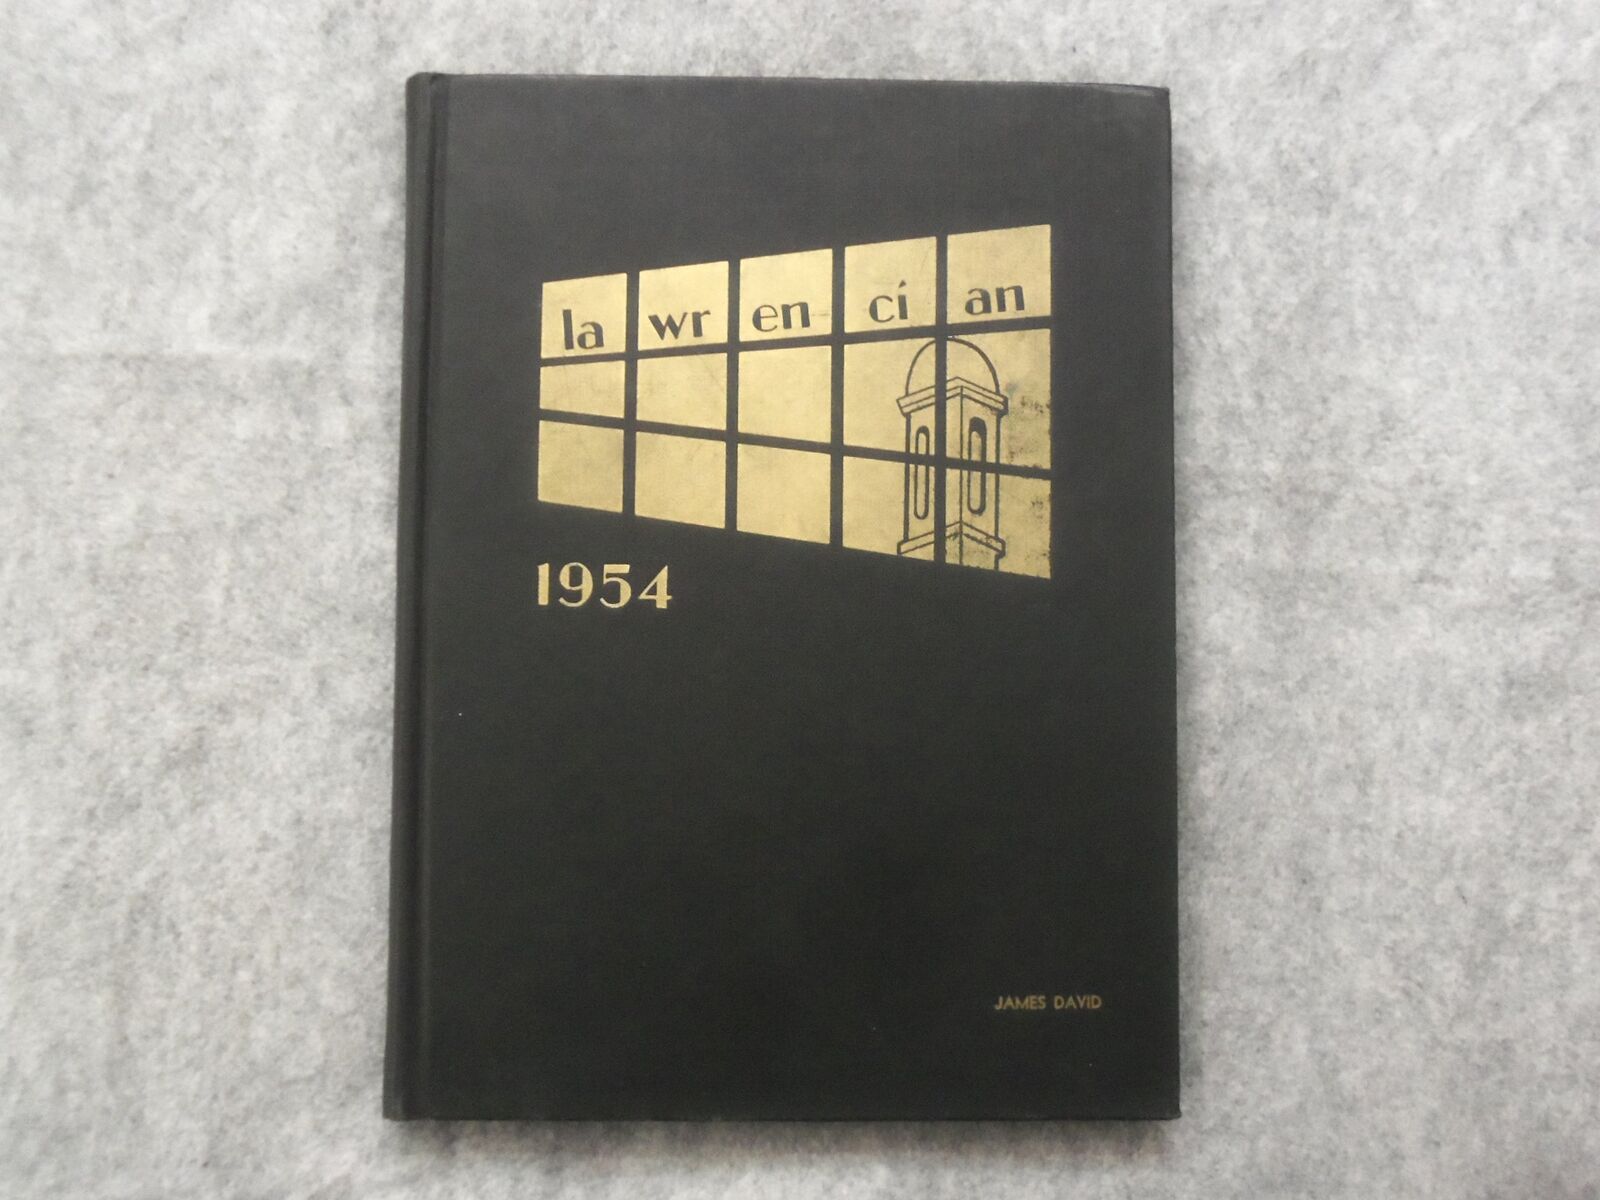 1954 THE LAWRENCIAN LAWRENCE HIGH SCHOOL YEARBOOK - LAWRENCE, NEW YORK - YB 3199